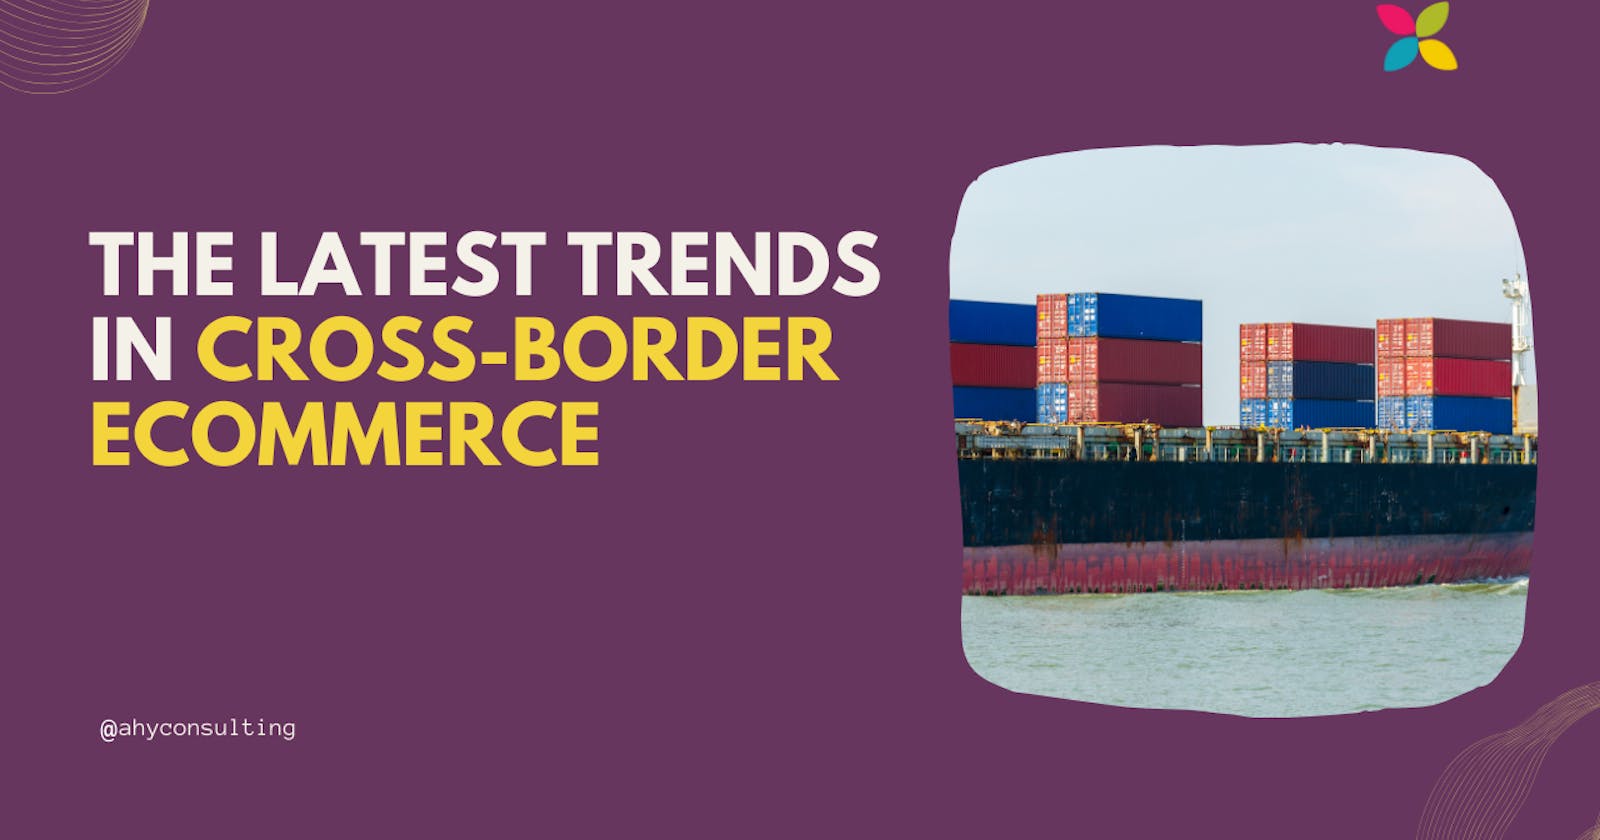 The Latest Trends in Cross-Border eCommerce